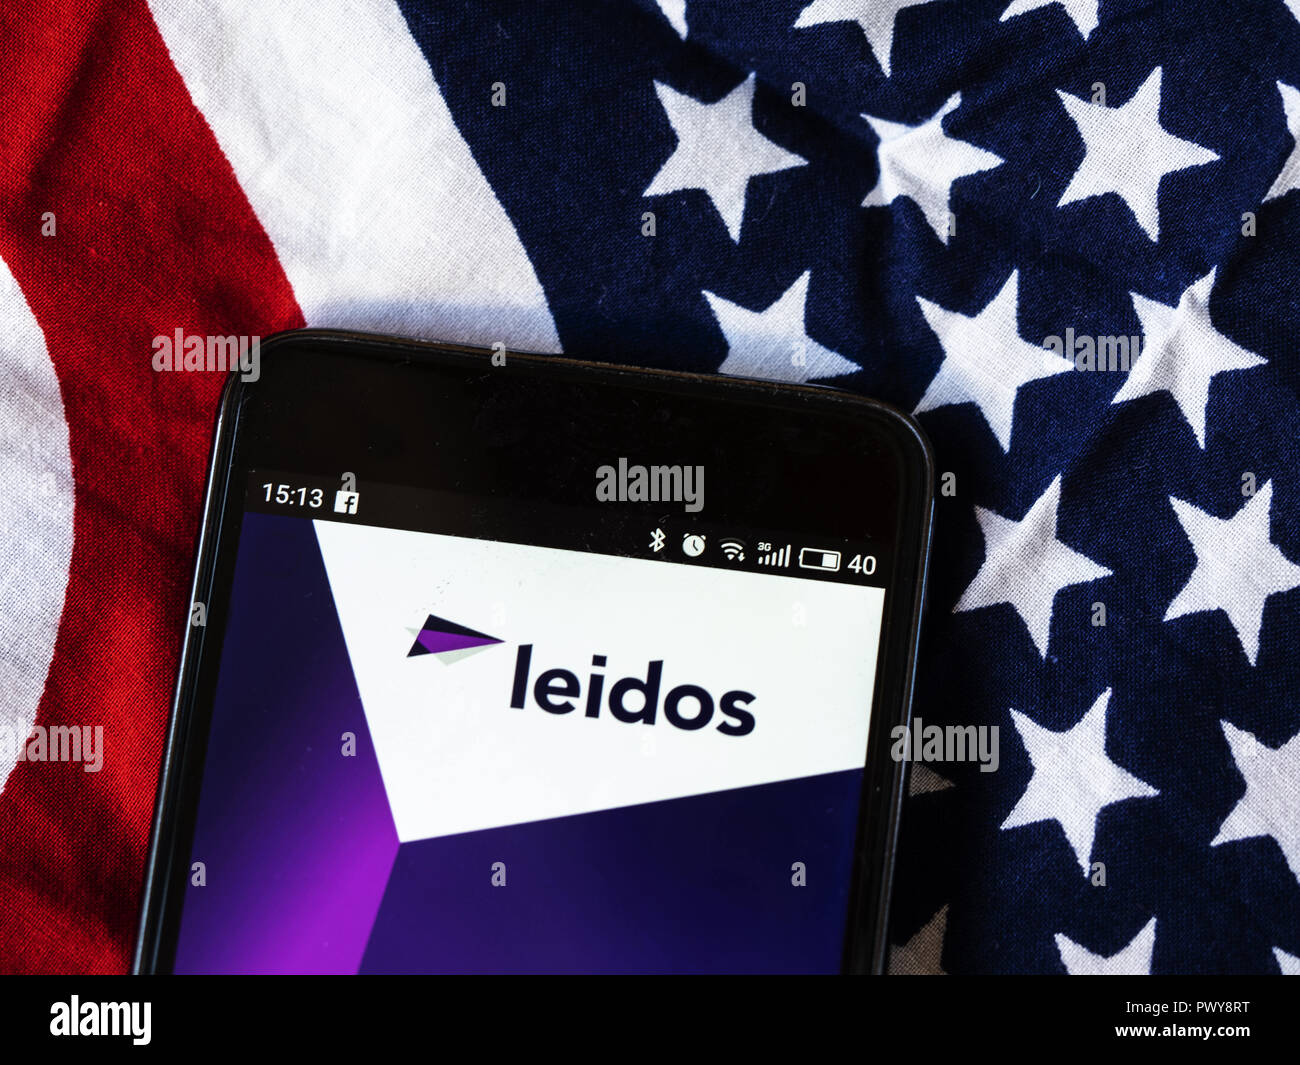 Kiev, Ukraine. 18th Oct, 2018. Leidos Scientific research company logo seen displayed on smart phone. Leidos, formerly known as Science Applications International Corporation, is an American defense, aviation, information technology, and biomedical research company, that provides scientific, engineering, systems integration, and technical services. Credit: Igor Golovniov/SOPA Images/ZUMA Wire/Alamy Live News Stock Photo